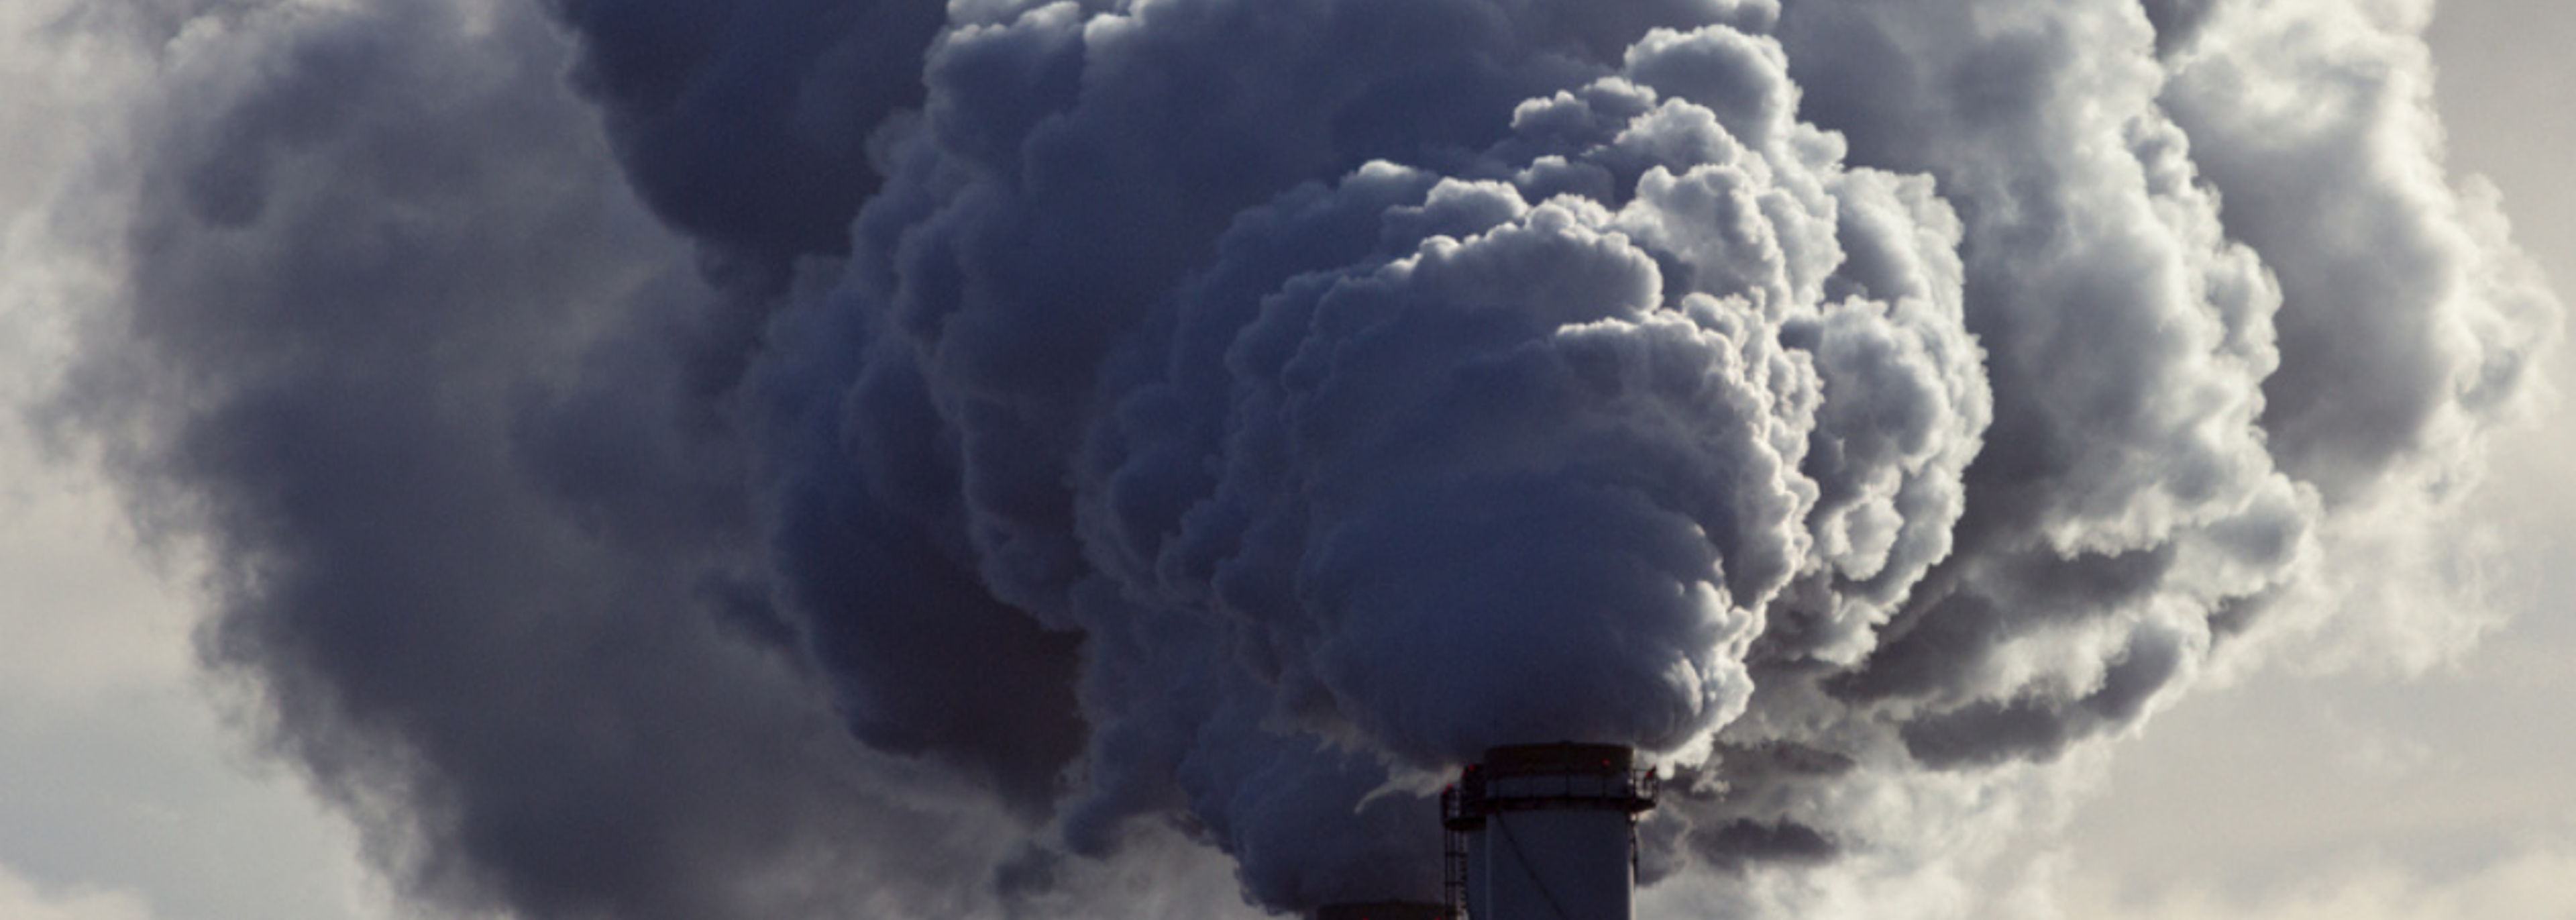 Air pollution linked to long COVID in young adults